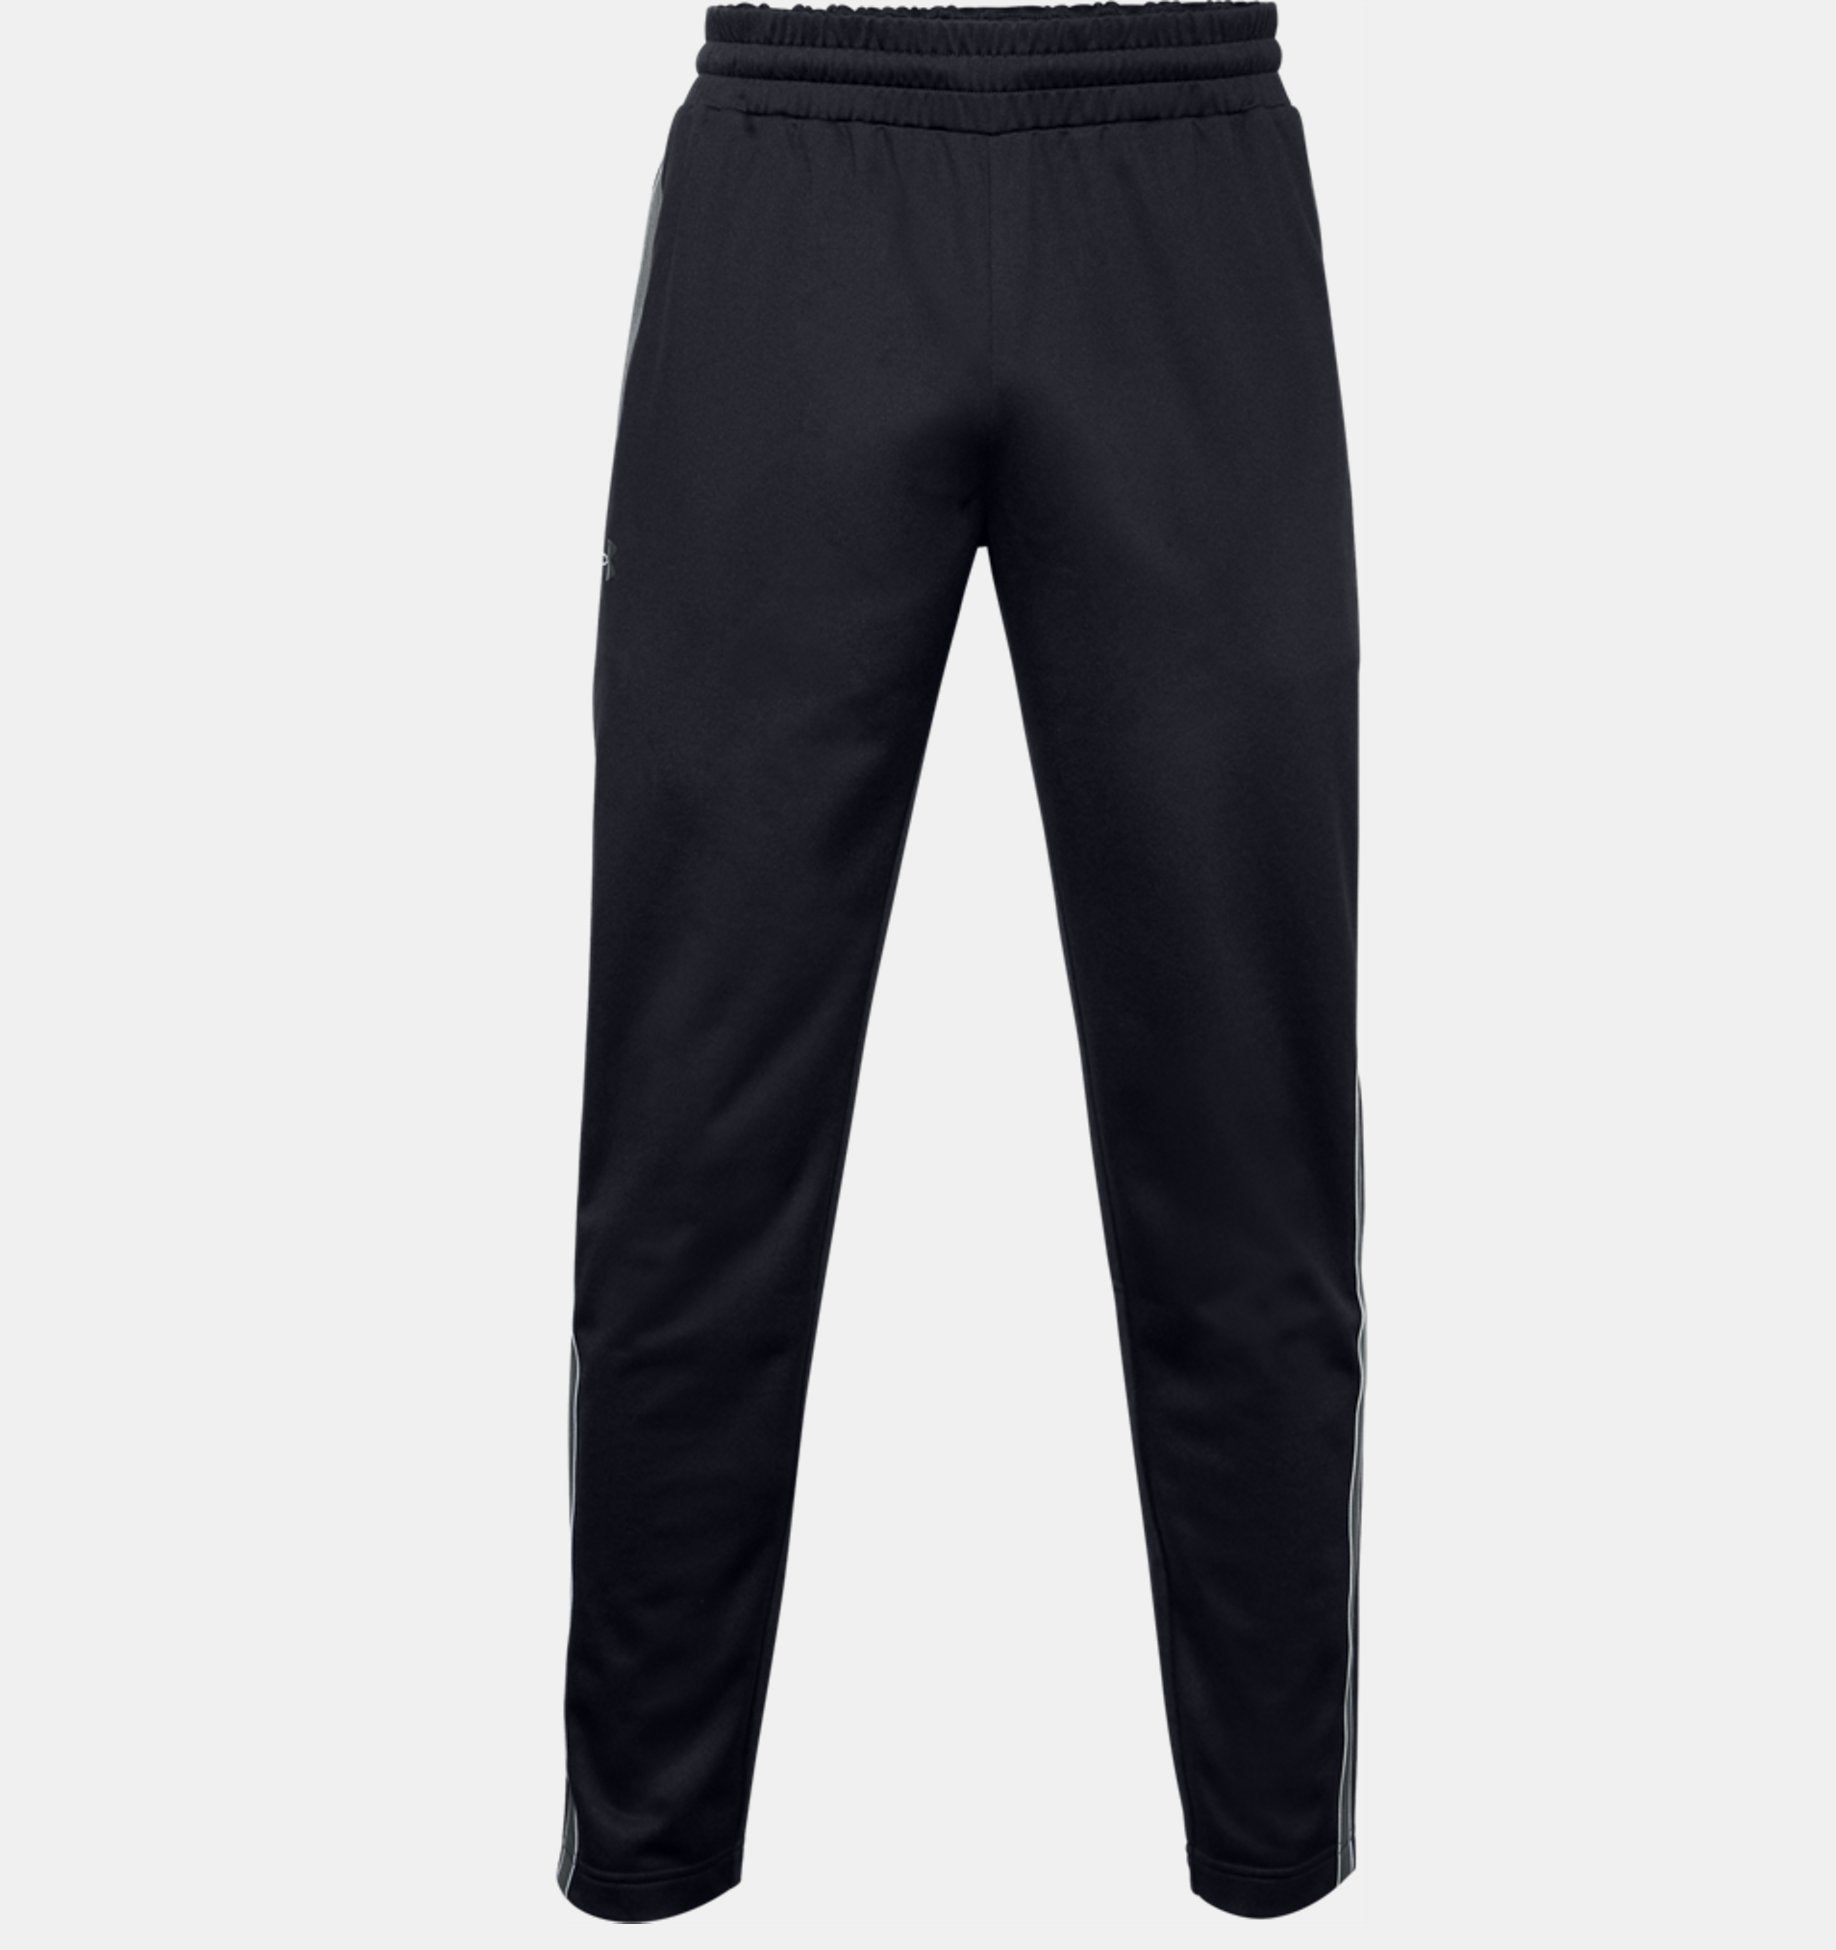 Under Armor Recover Joggers - Black